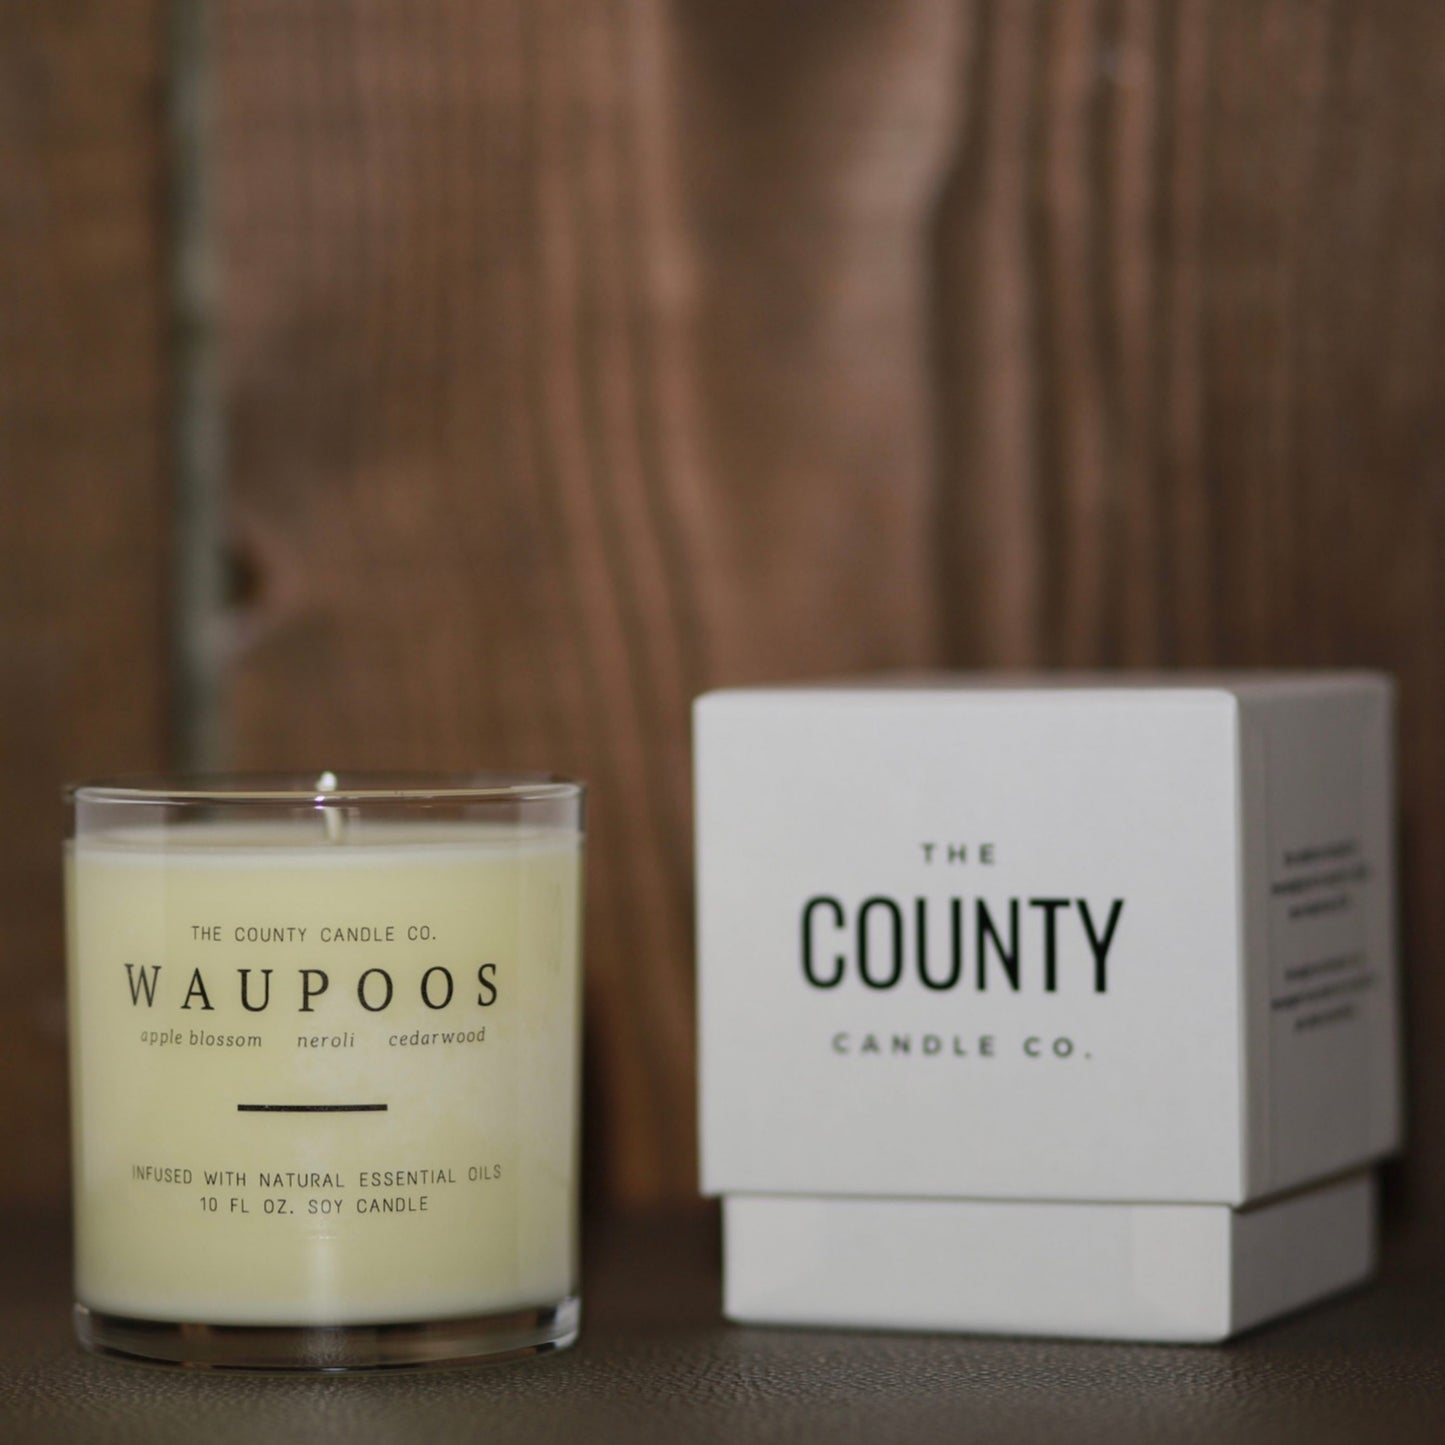 Waupoos | The County Candle Co.